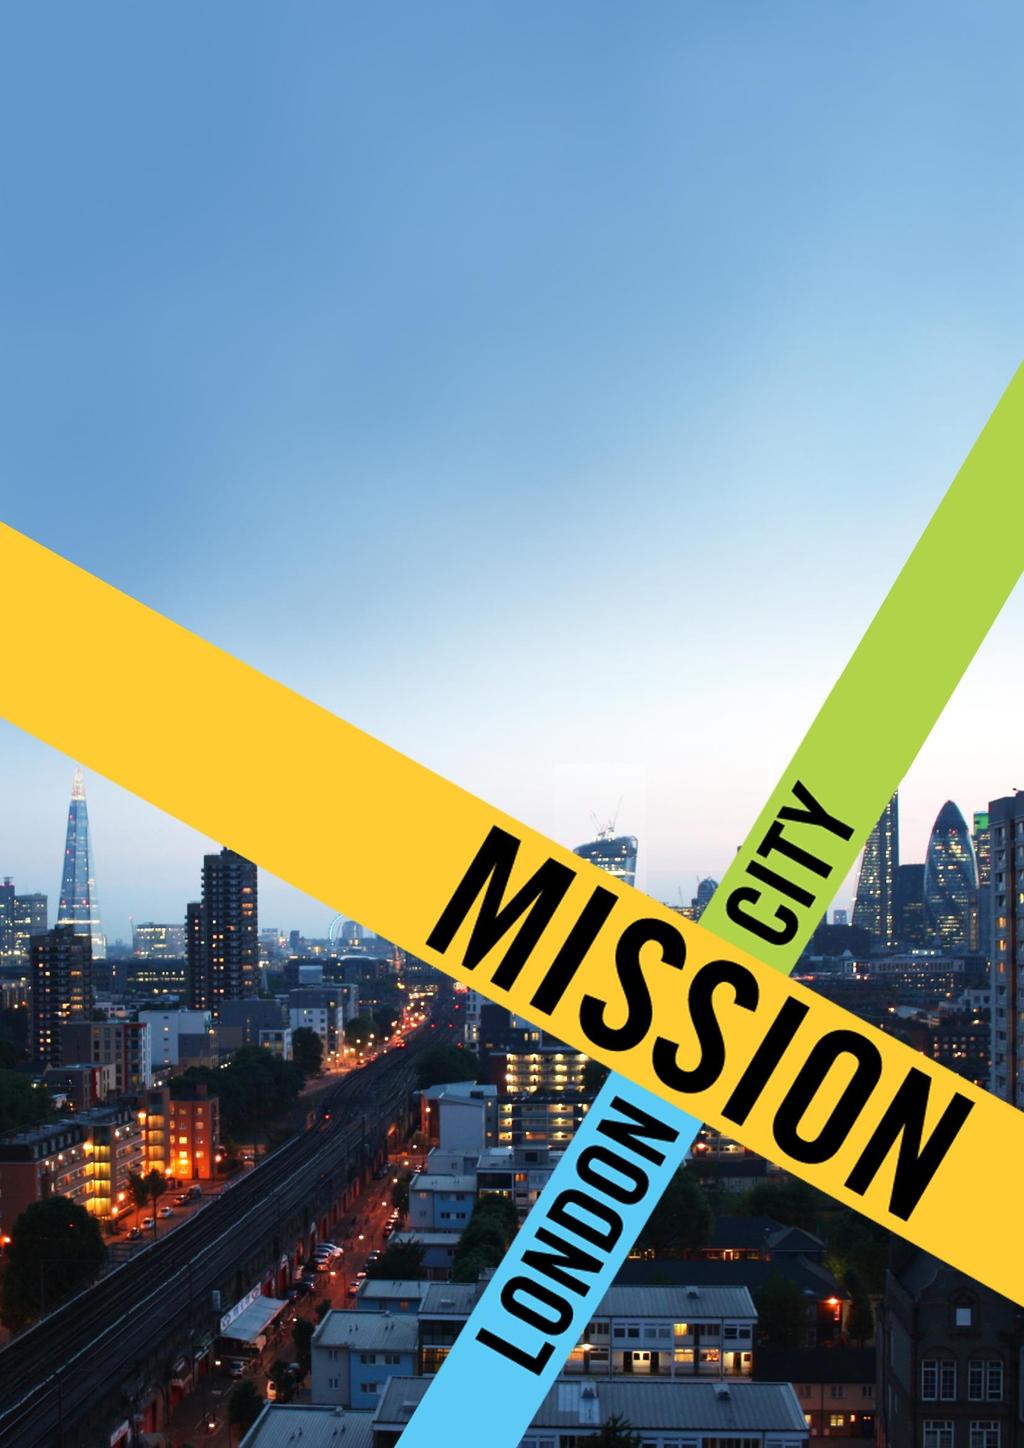 London City Mission Head of HR